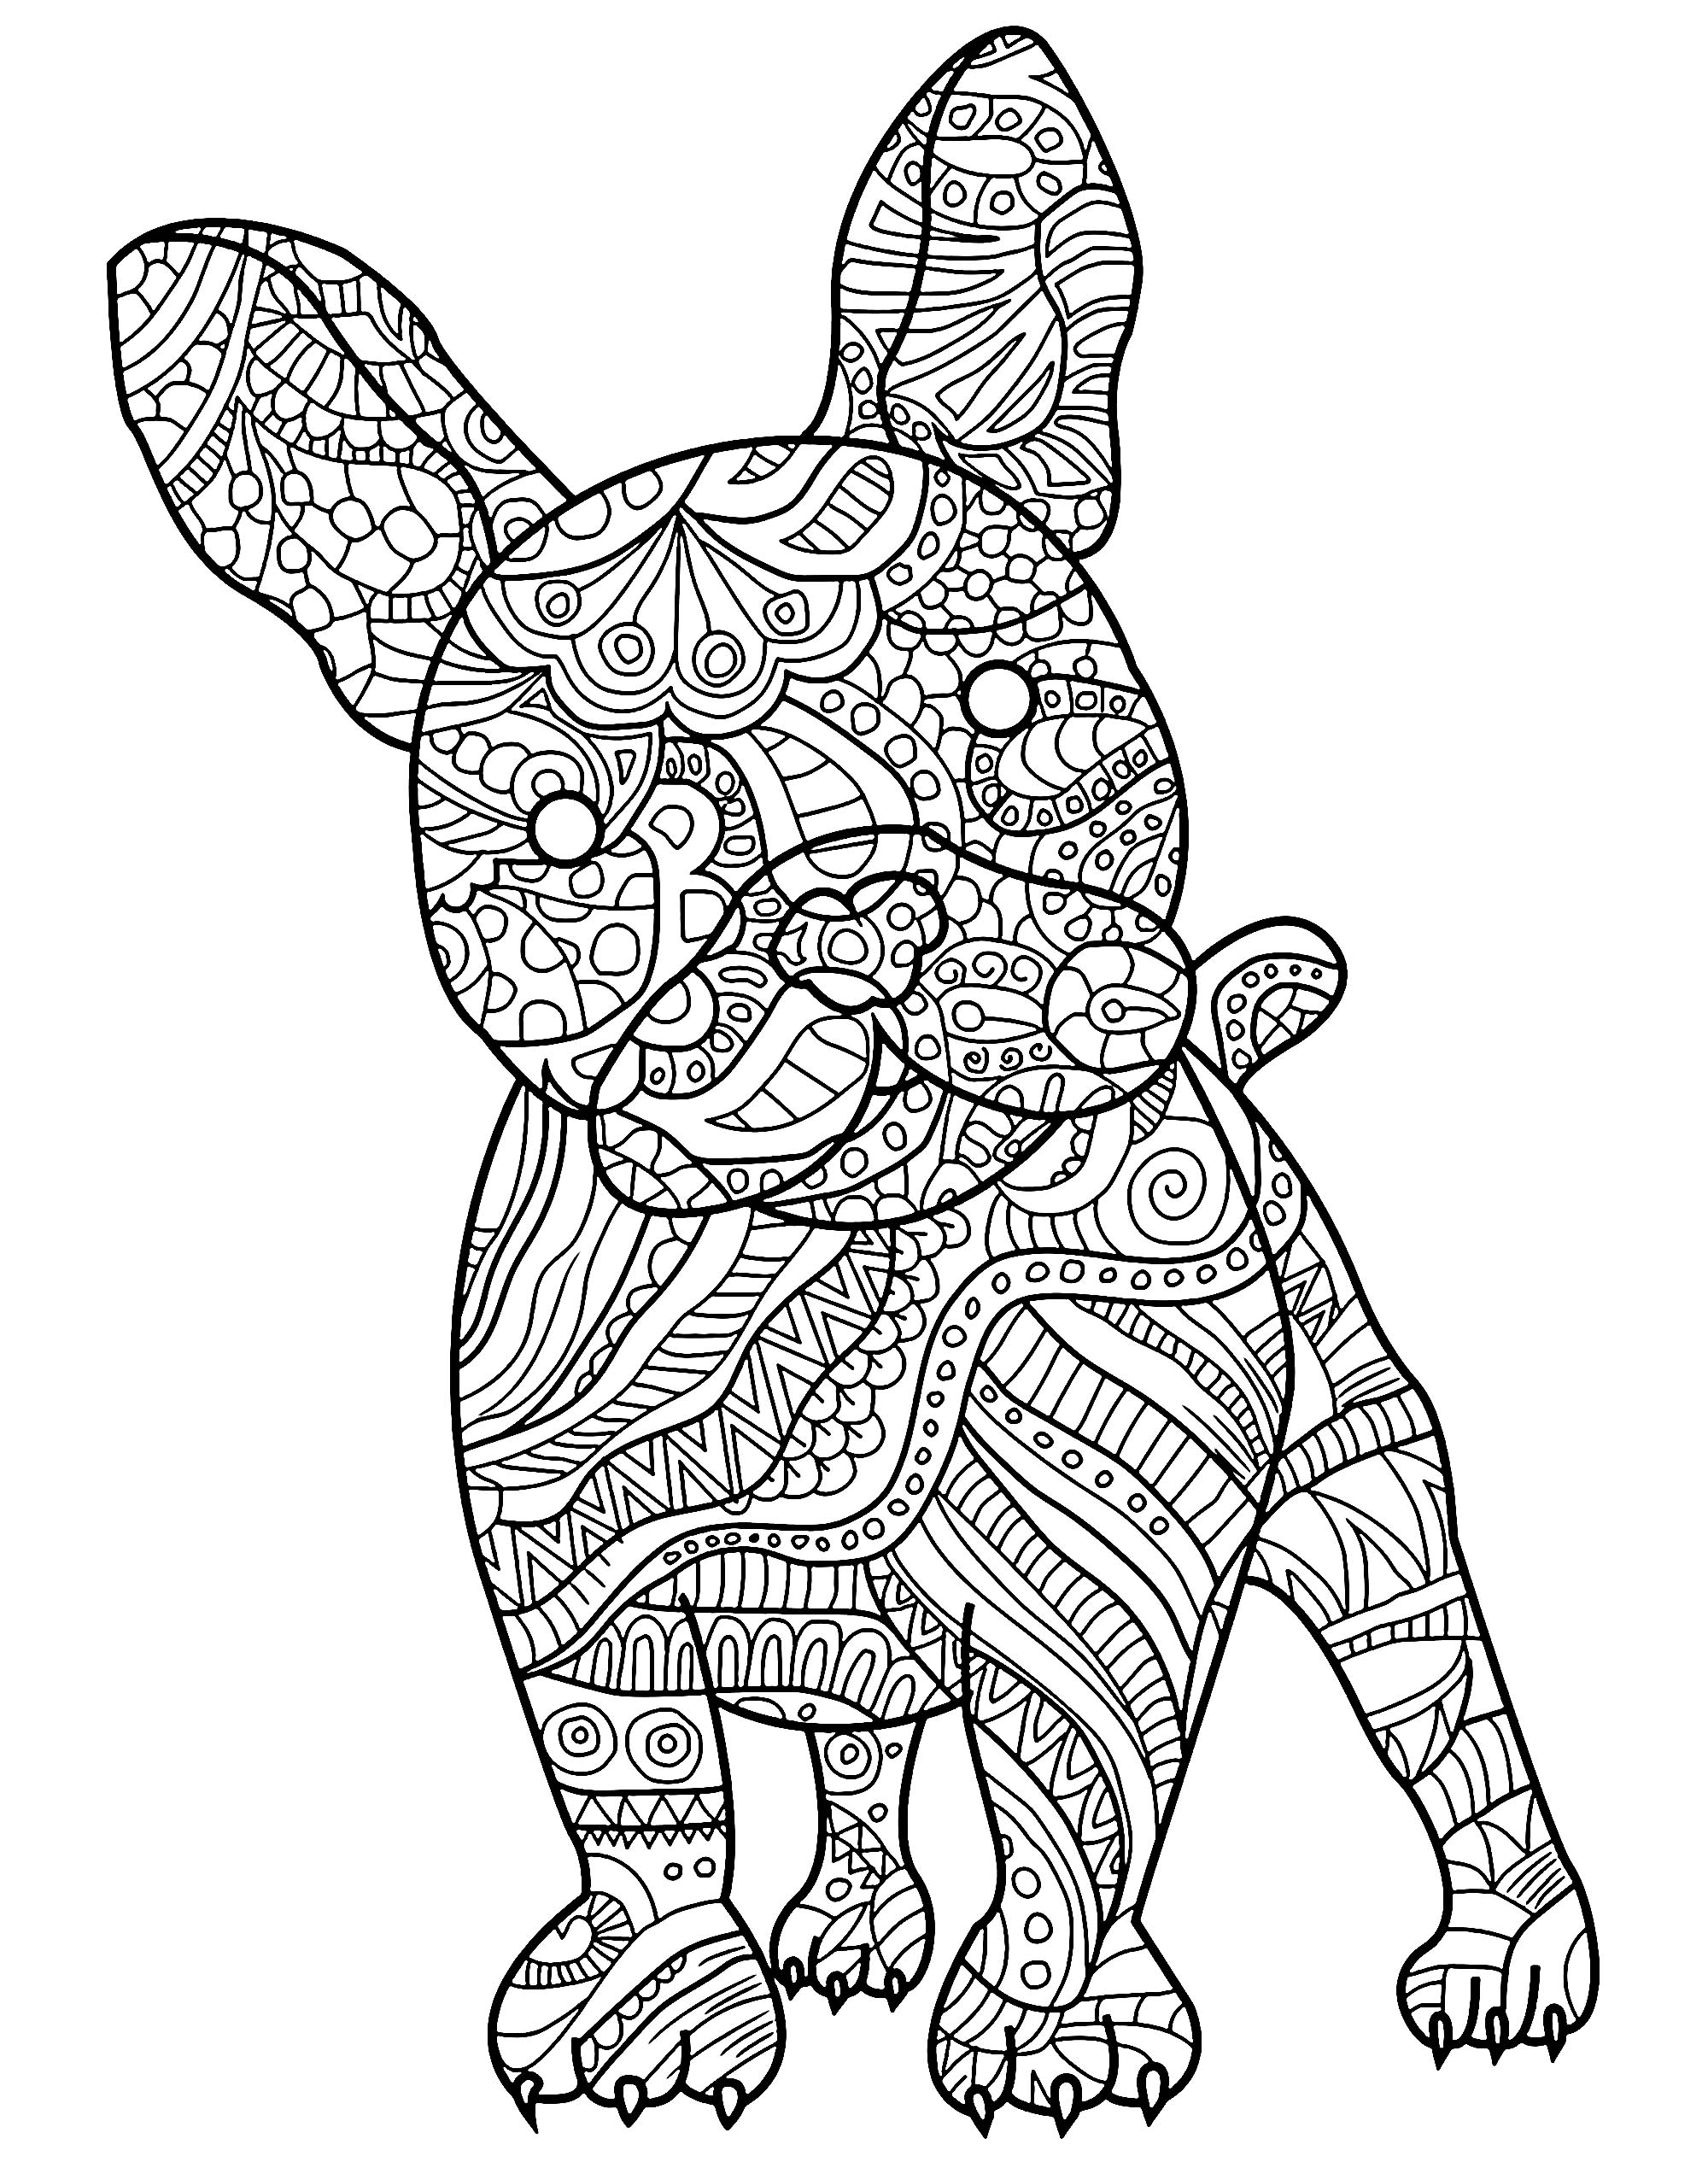 Download Dog To Download For Free Dogs Kids Coloring Pages